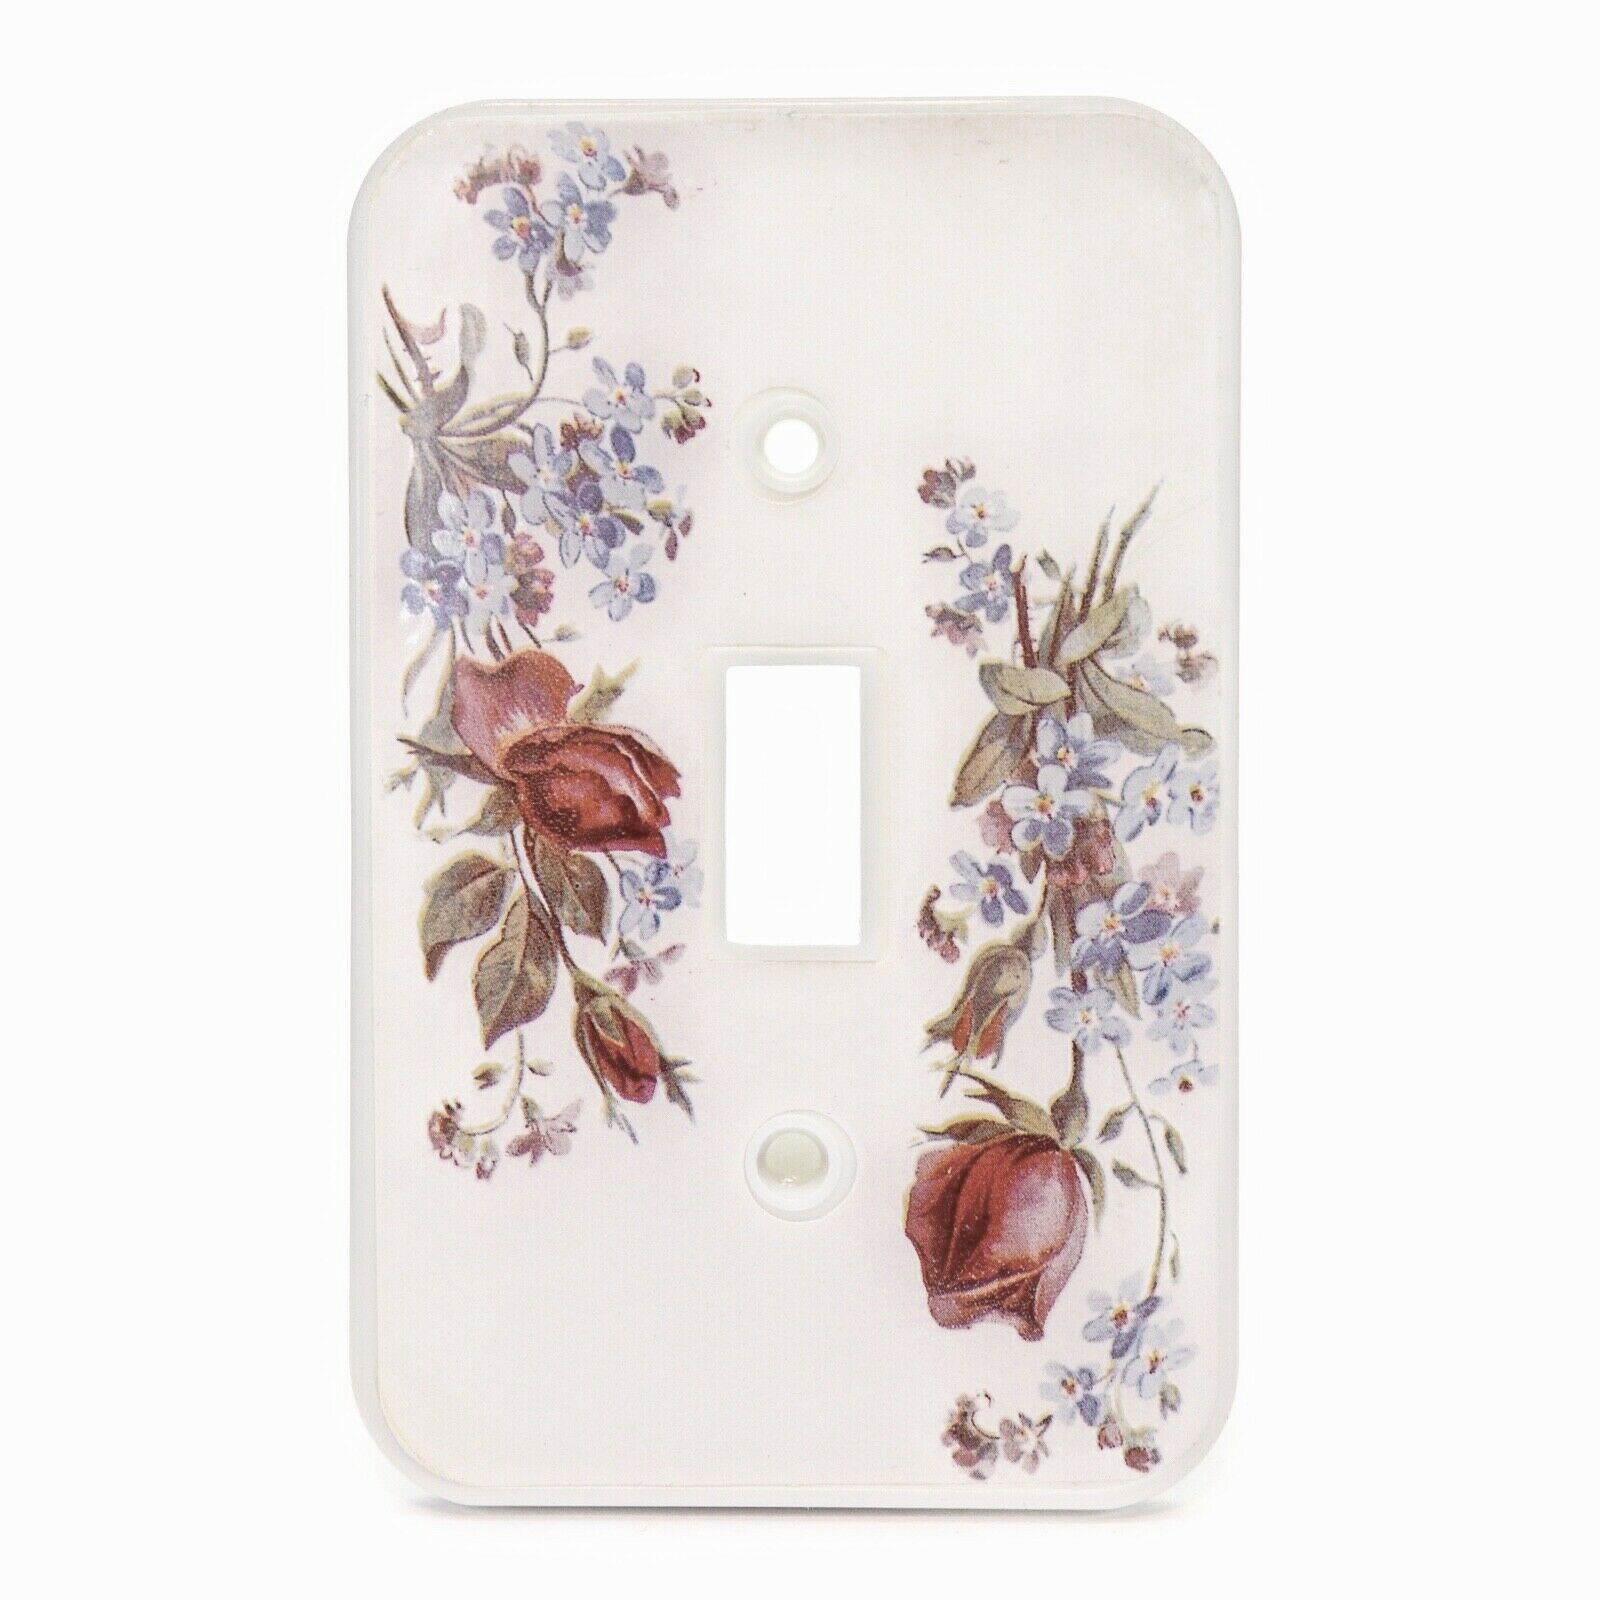 Vintage Decorative Electrical Witch Plate Cover Roses Floral Plastic - $4.92